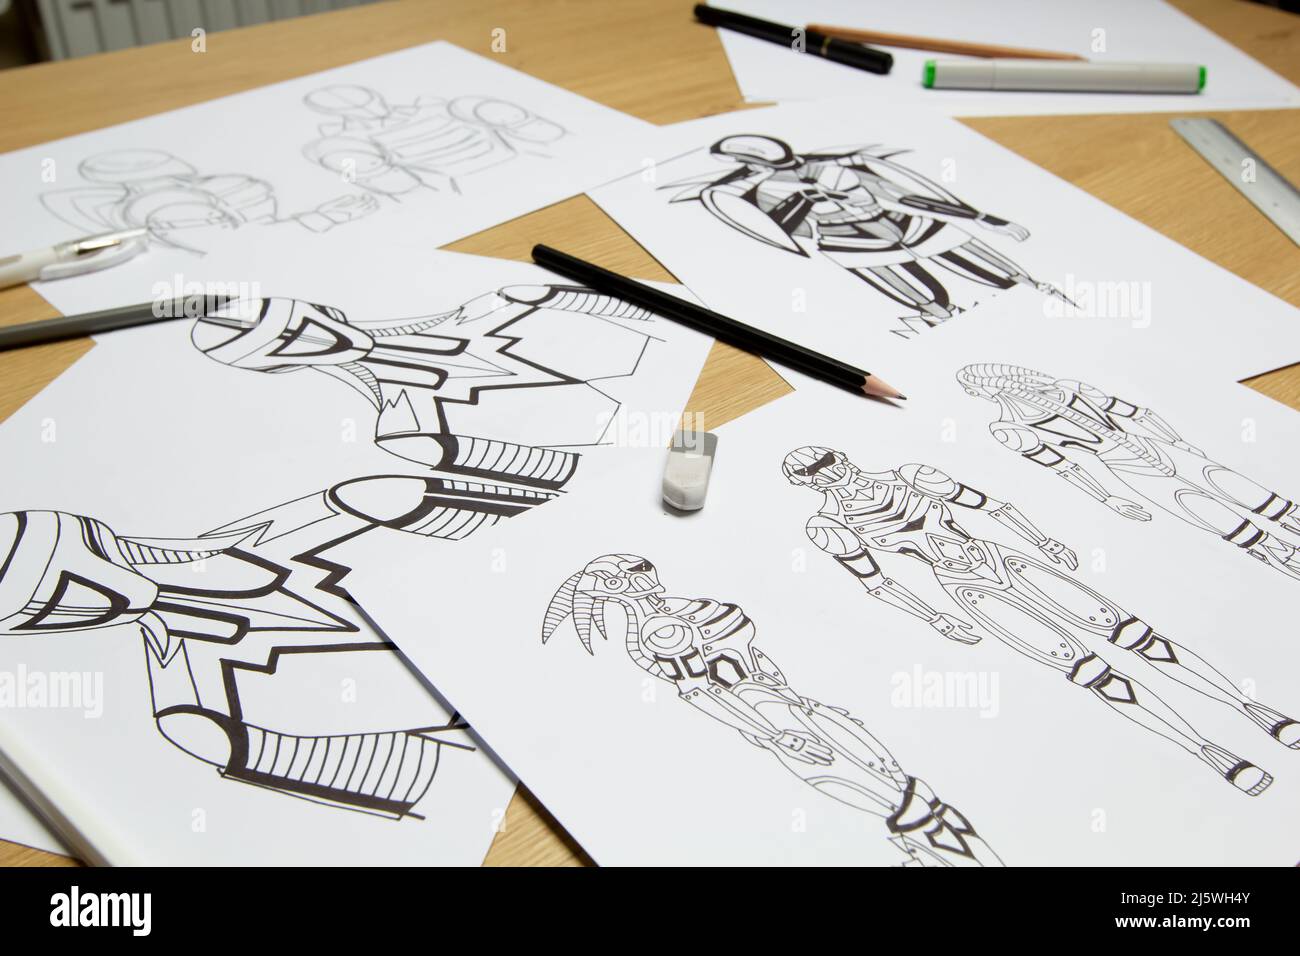 Sketches on paper of animated drawings of cyborg robots as characters for a video game. Concept art. Stock Photo